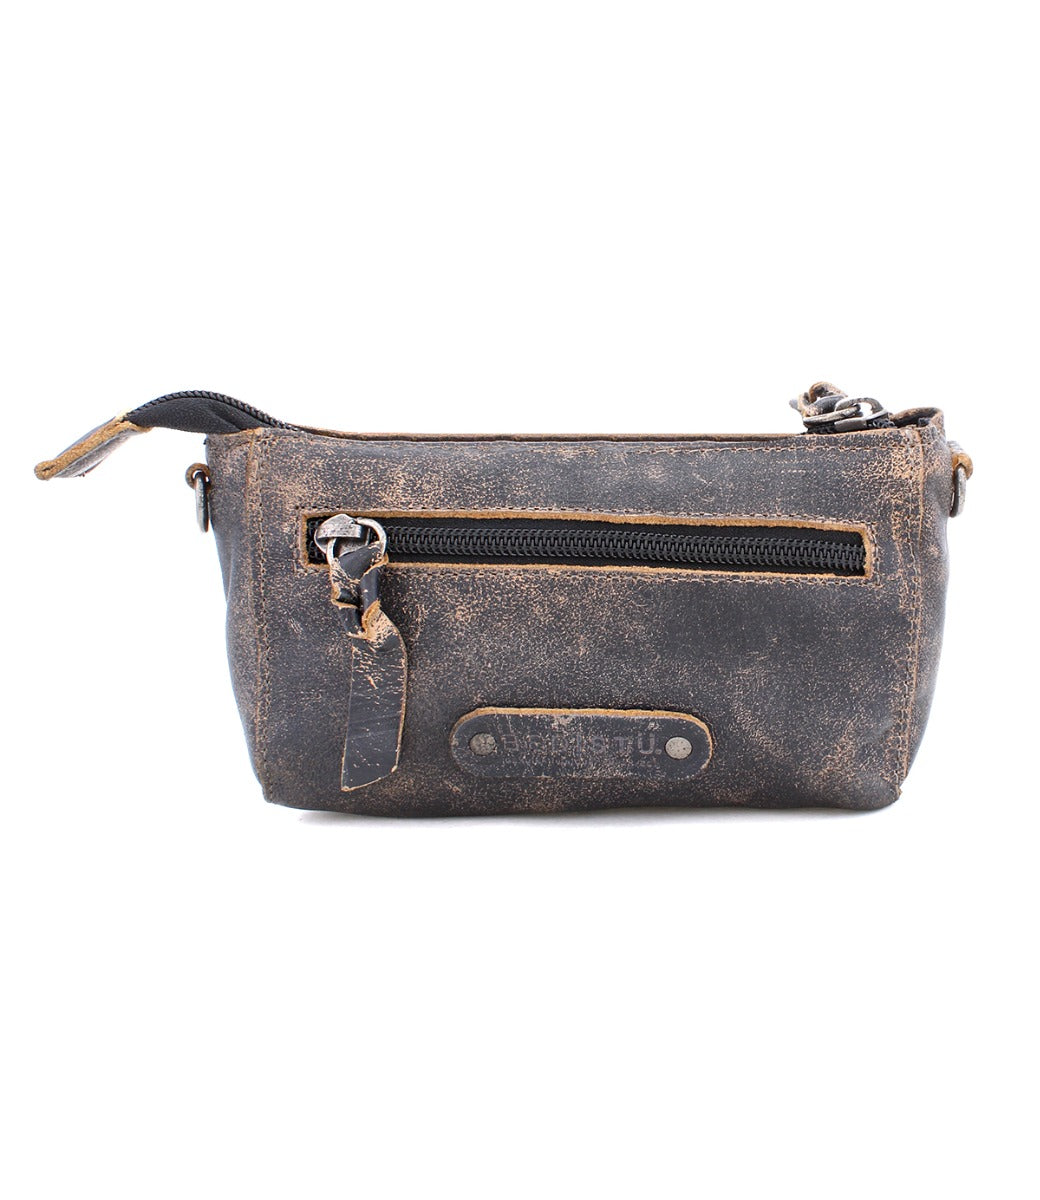 A small brown leather Encase purse with a zipper, by Bed Stu.